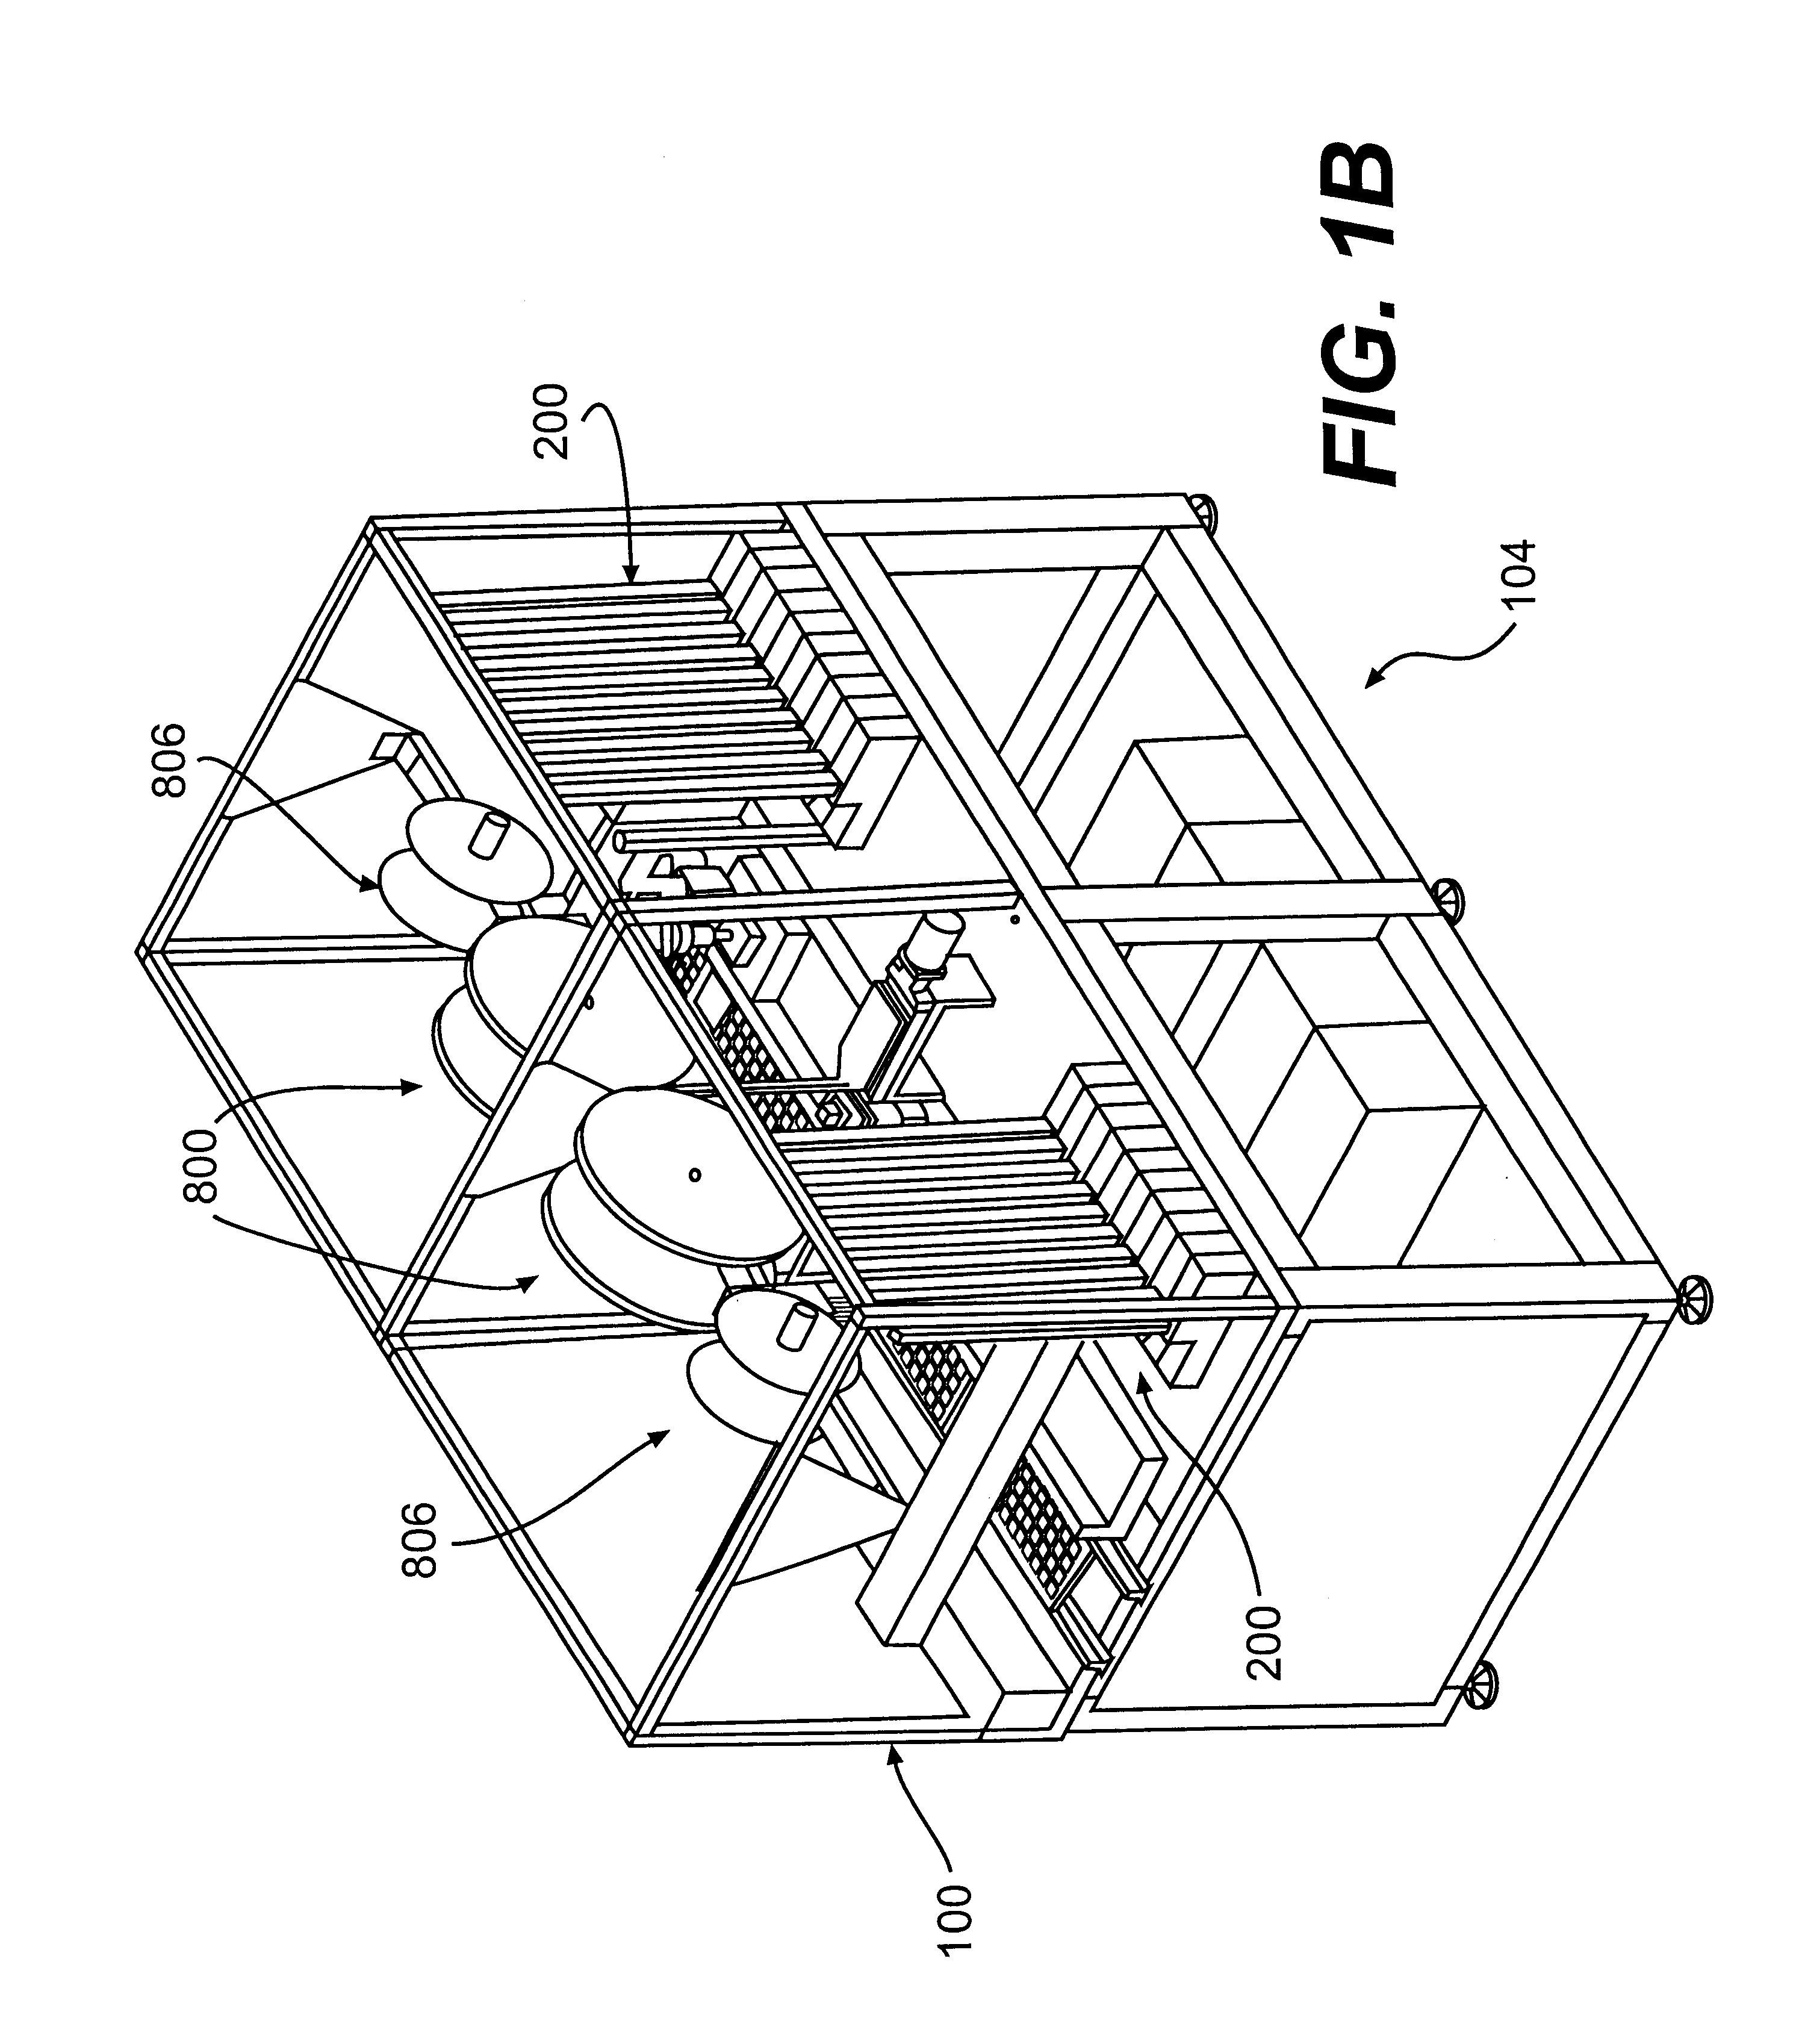 Apparatus for and method of manufacturing a semiconductor die carrier